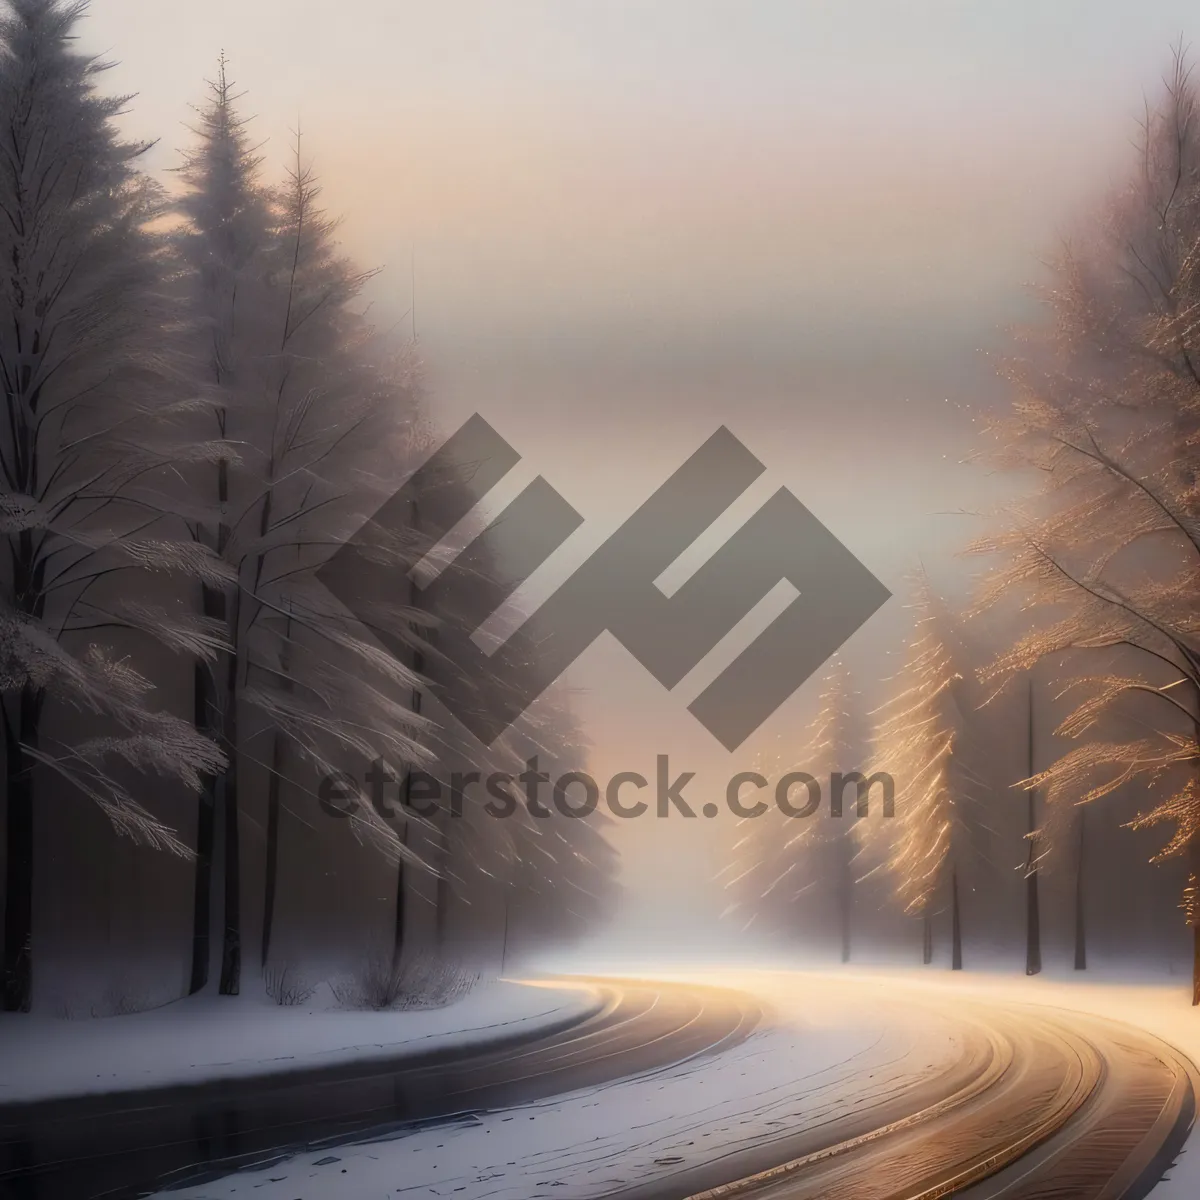 Picture of Winter Wonderland: Serene Snow-Covered Mountain Road